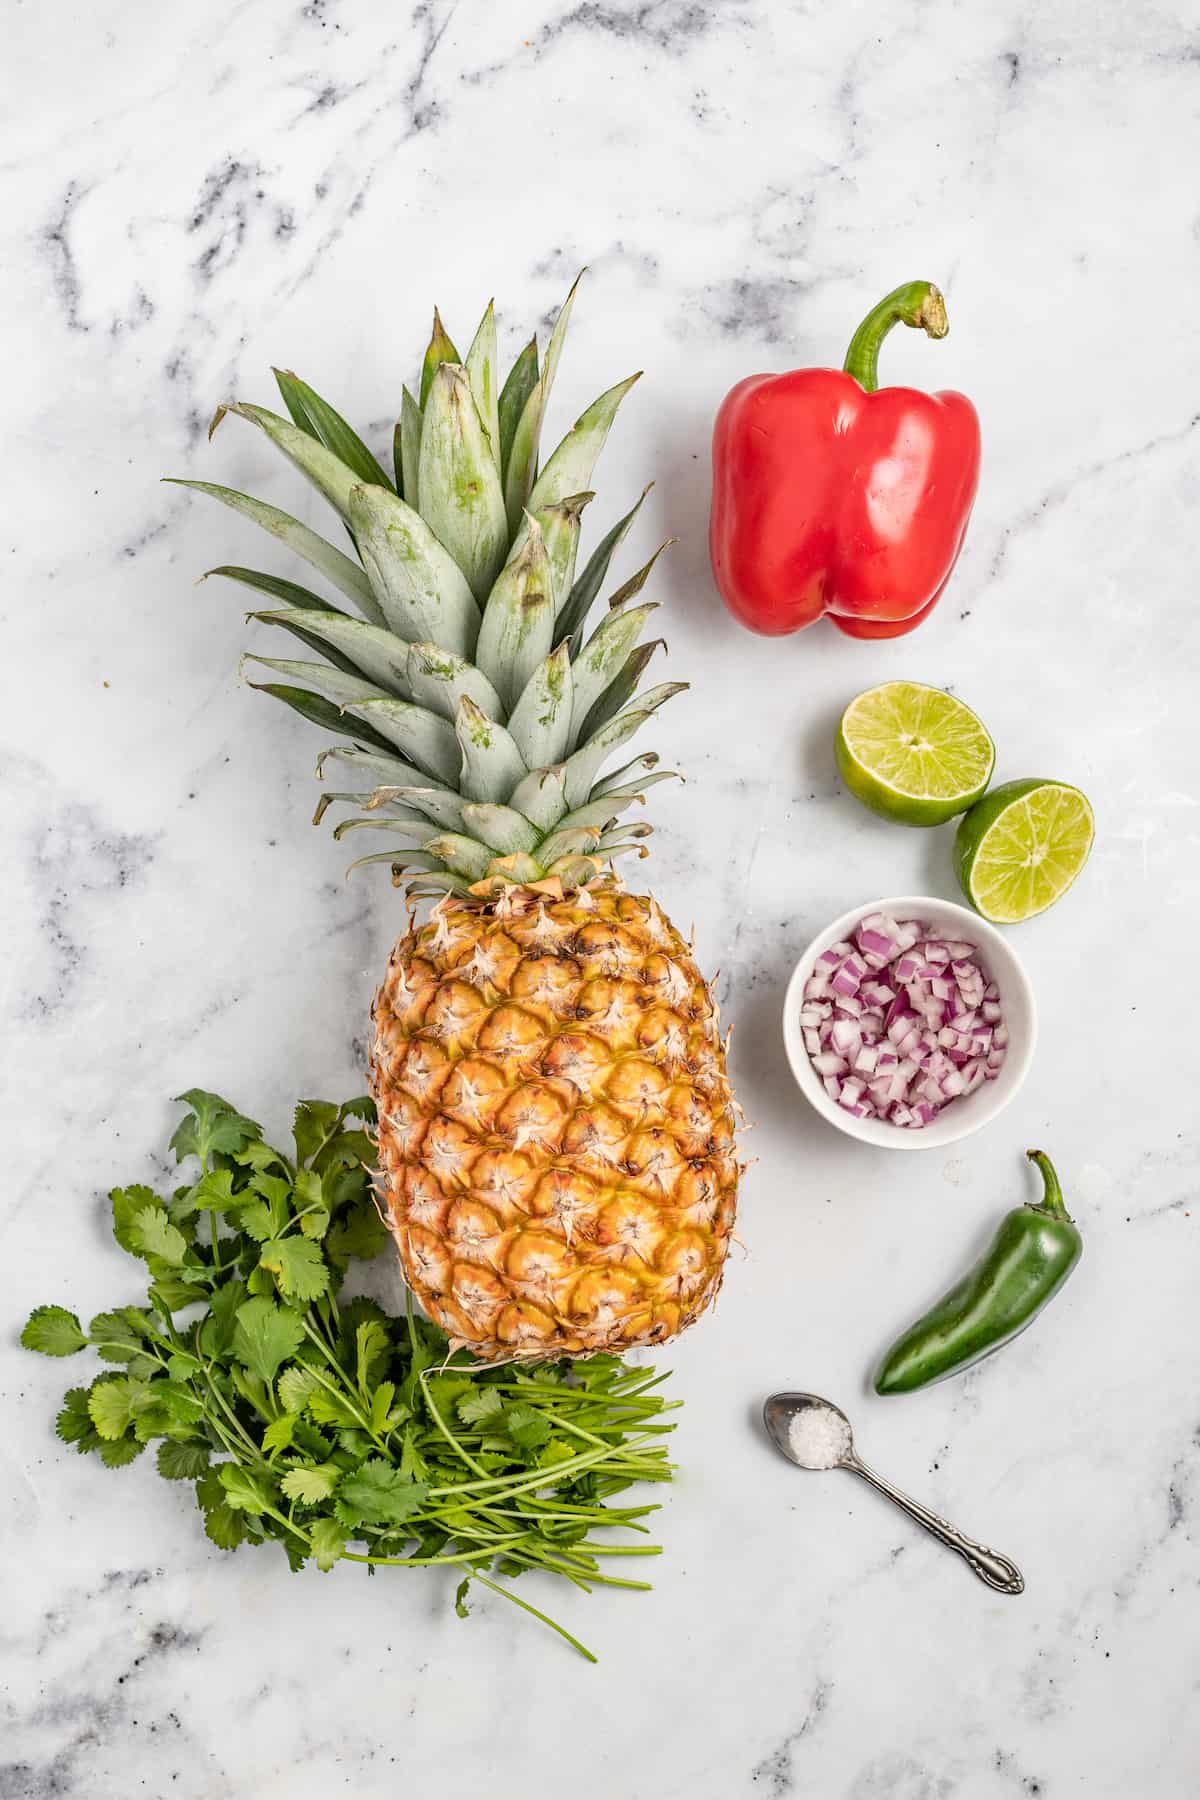 Ingredients for pineapple salsa.